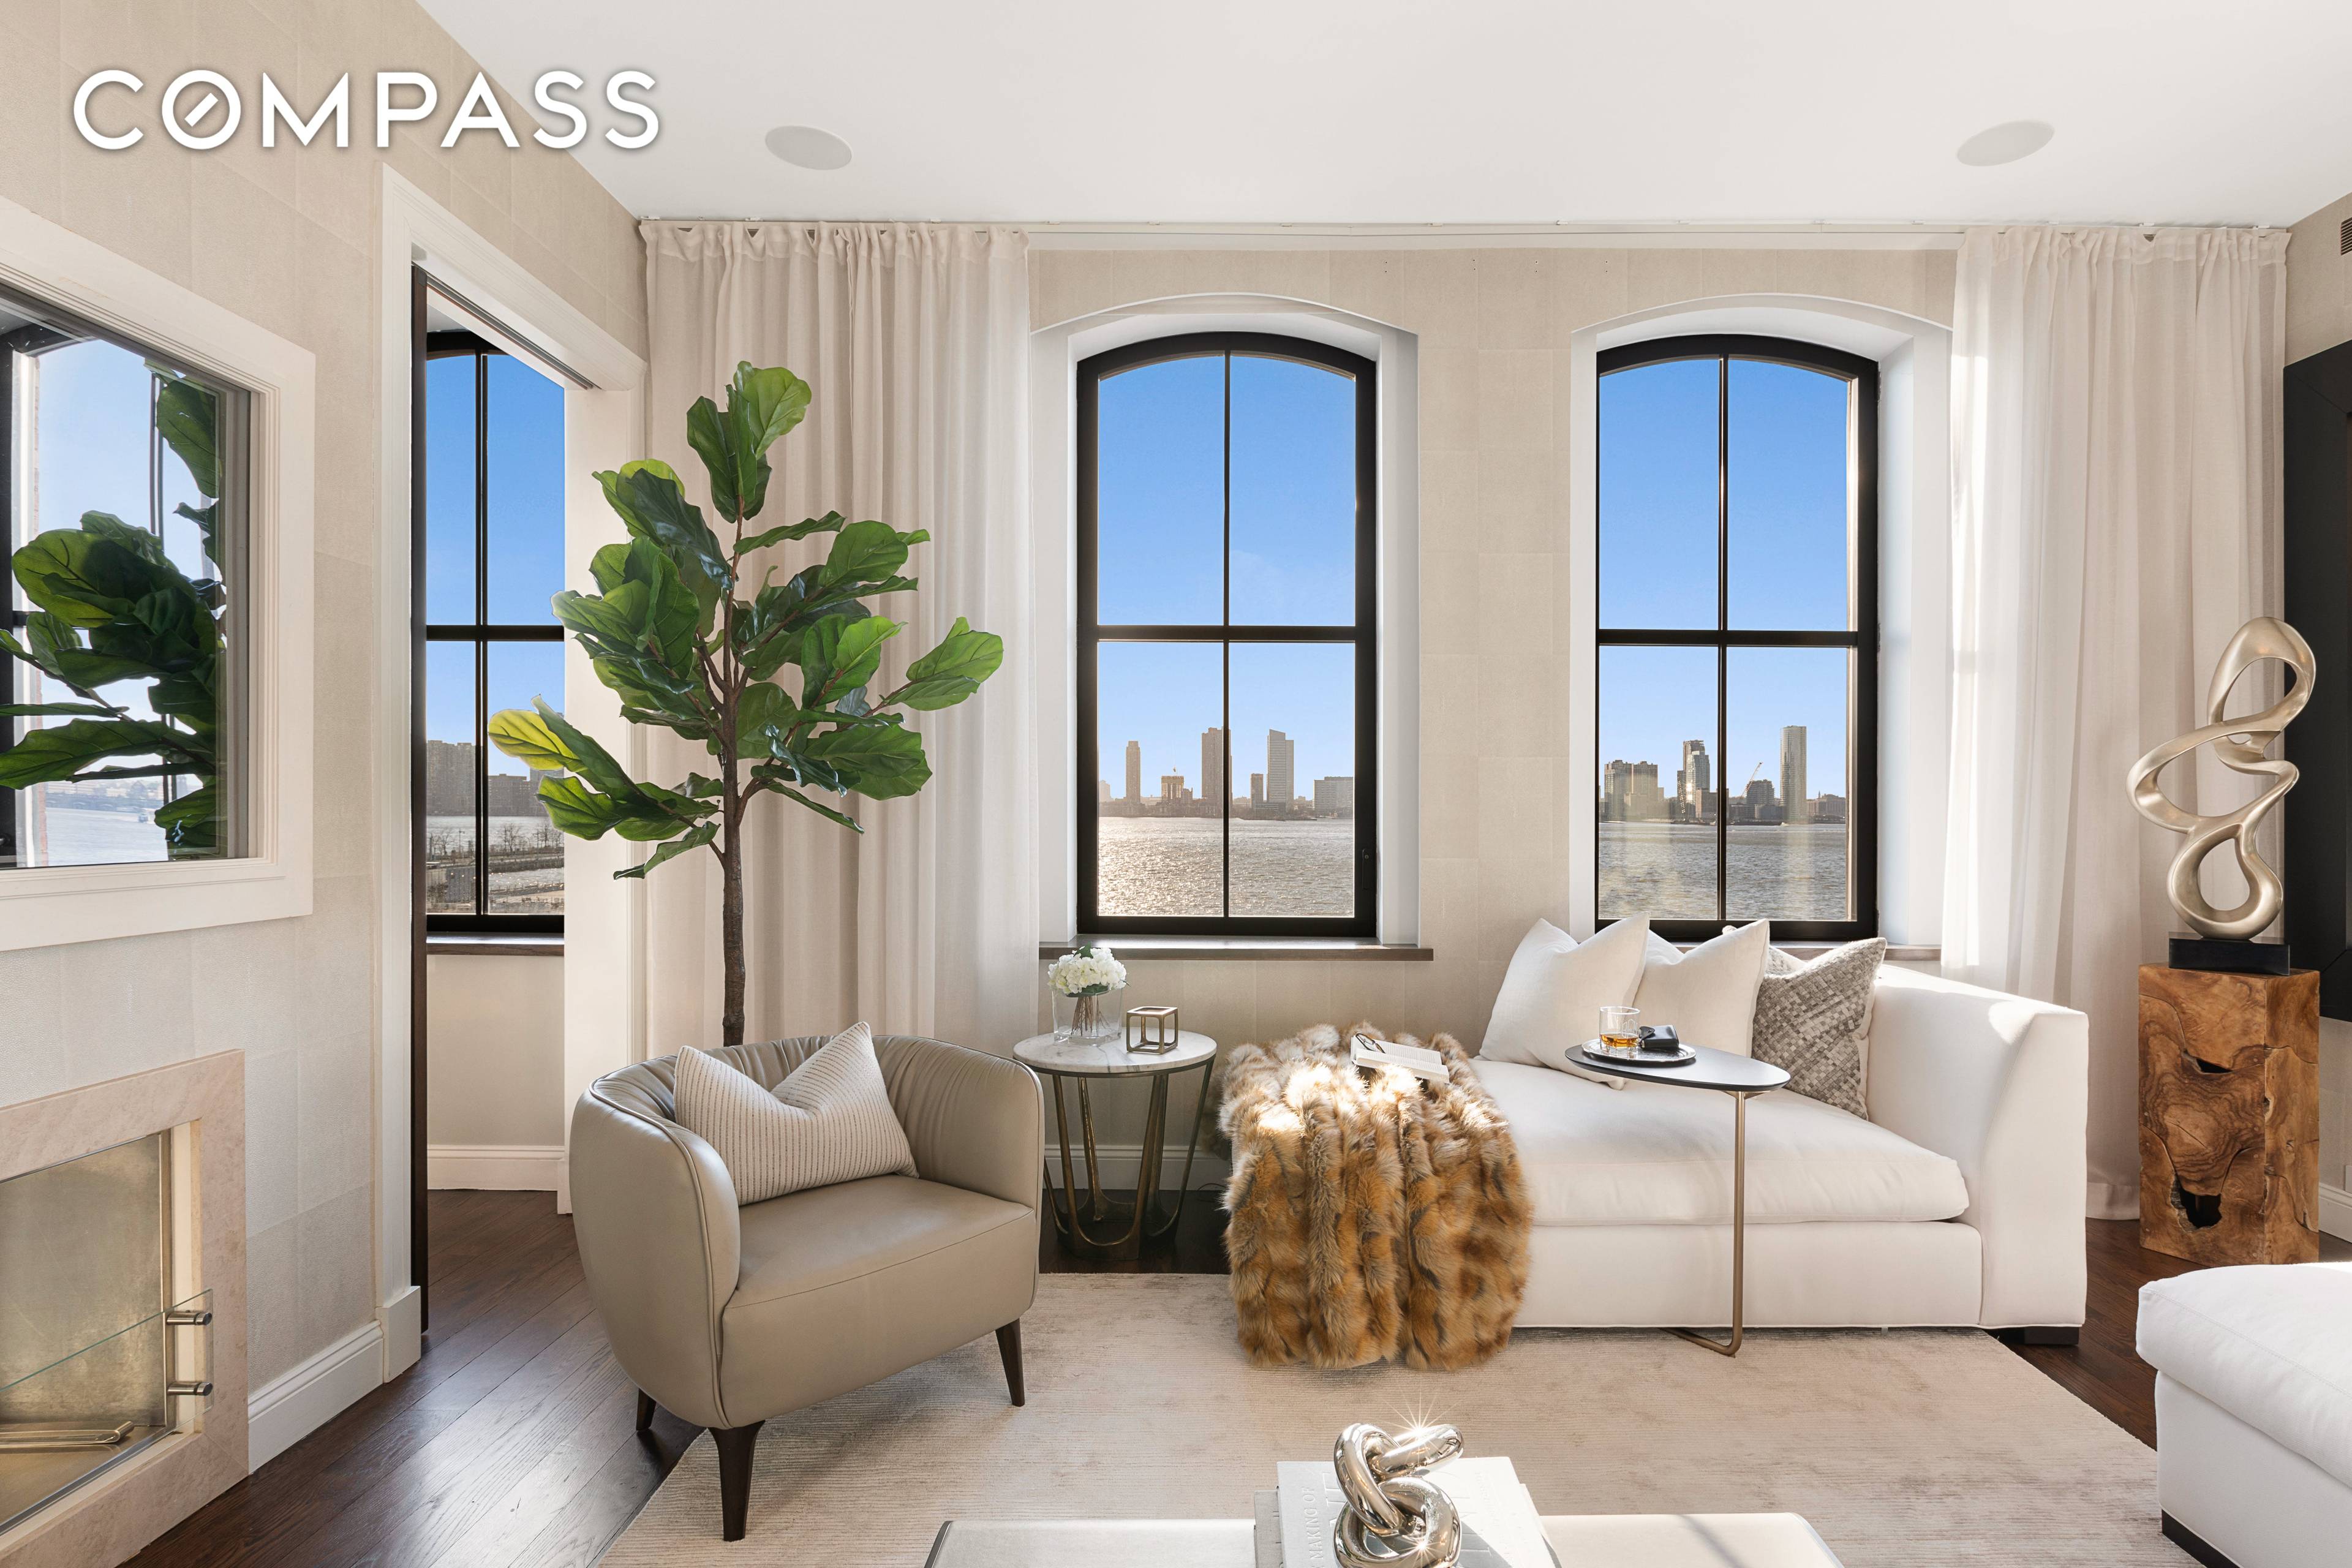 In the heart of TriBeCa s landmark historic district, 250 West Street the monumental former warehouse built in 1906 is being transformed into a unique collection of 106 luxury condominium ...